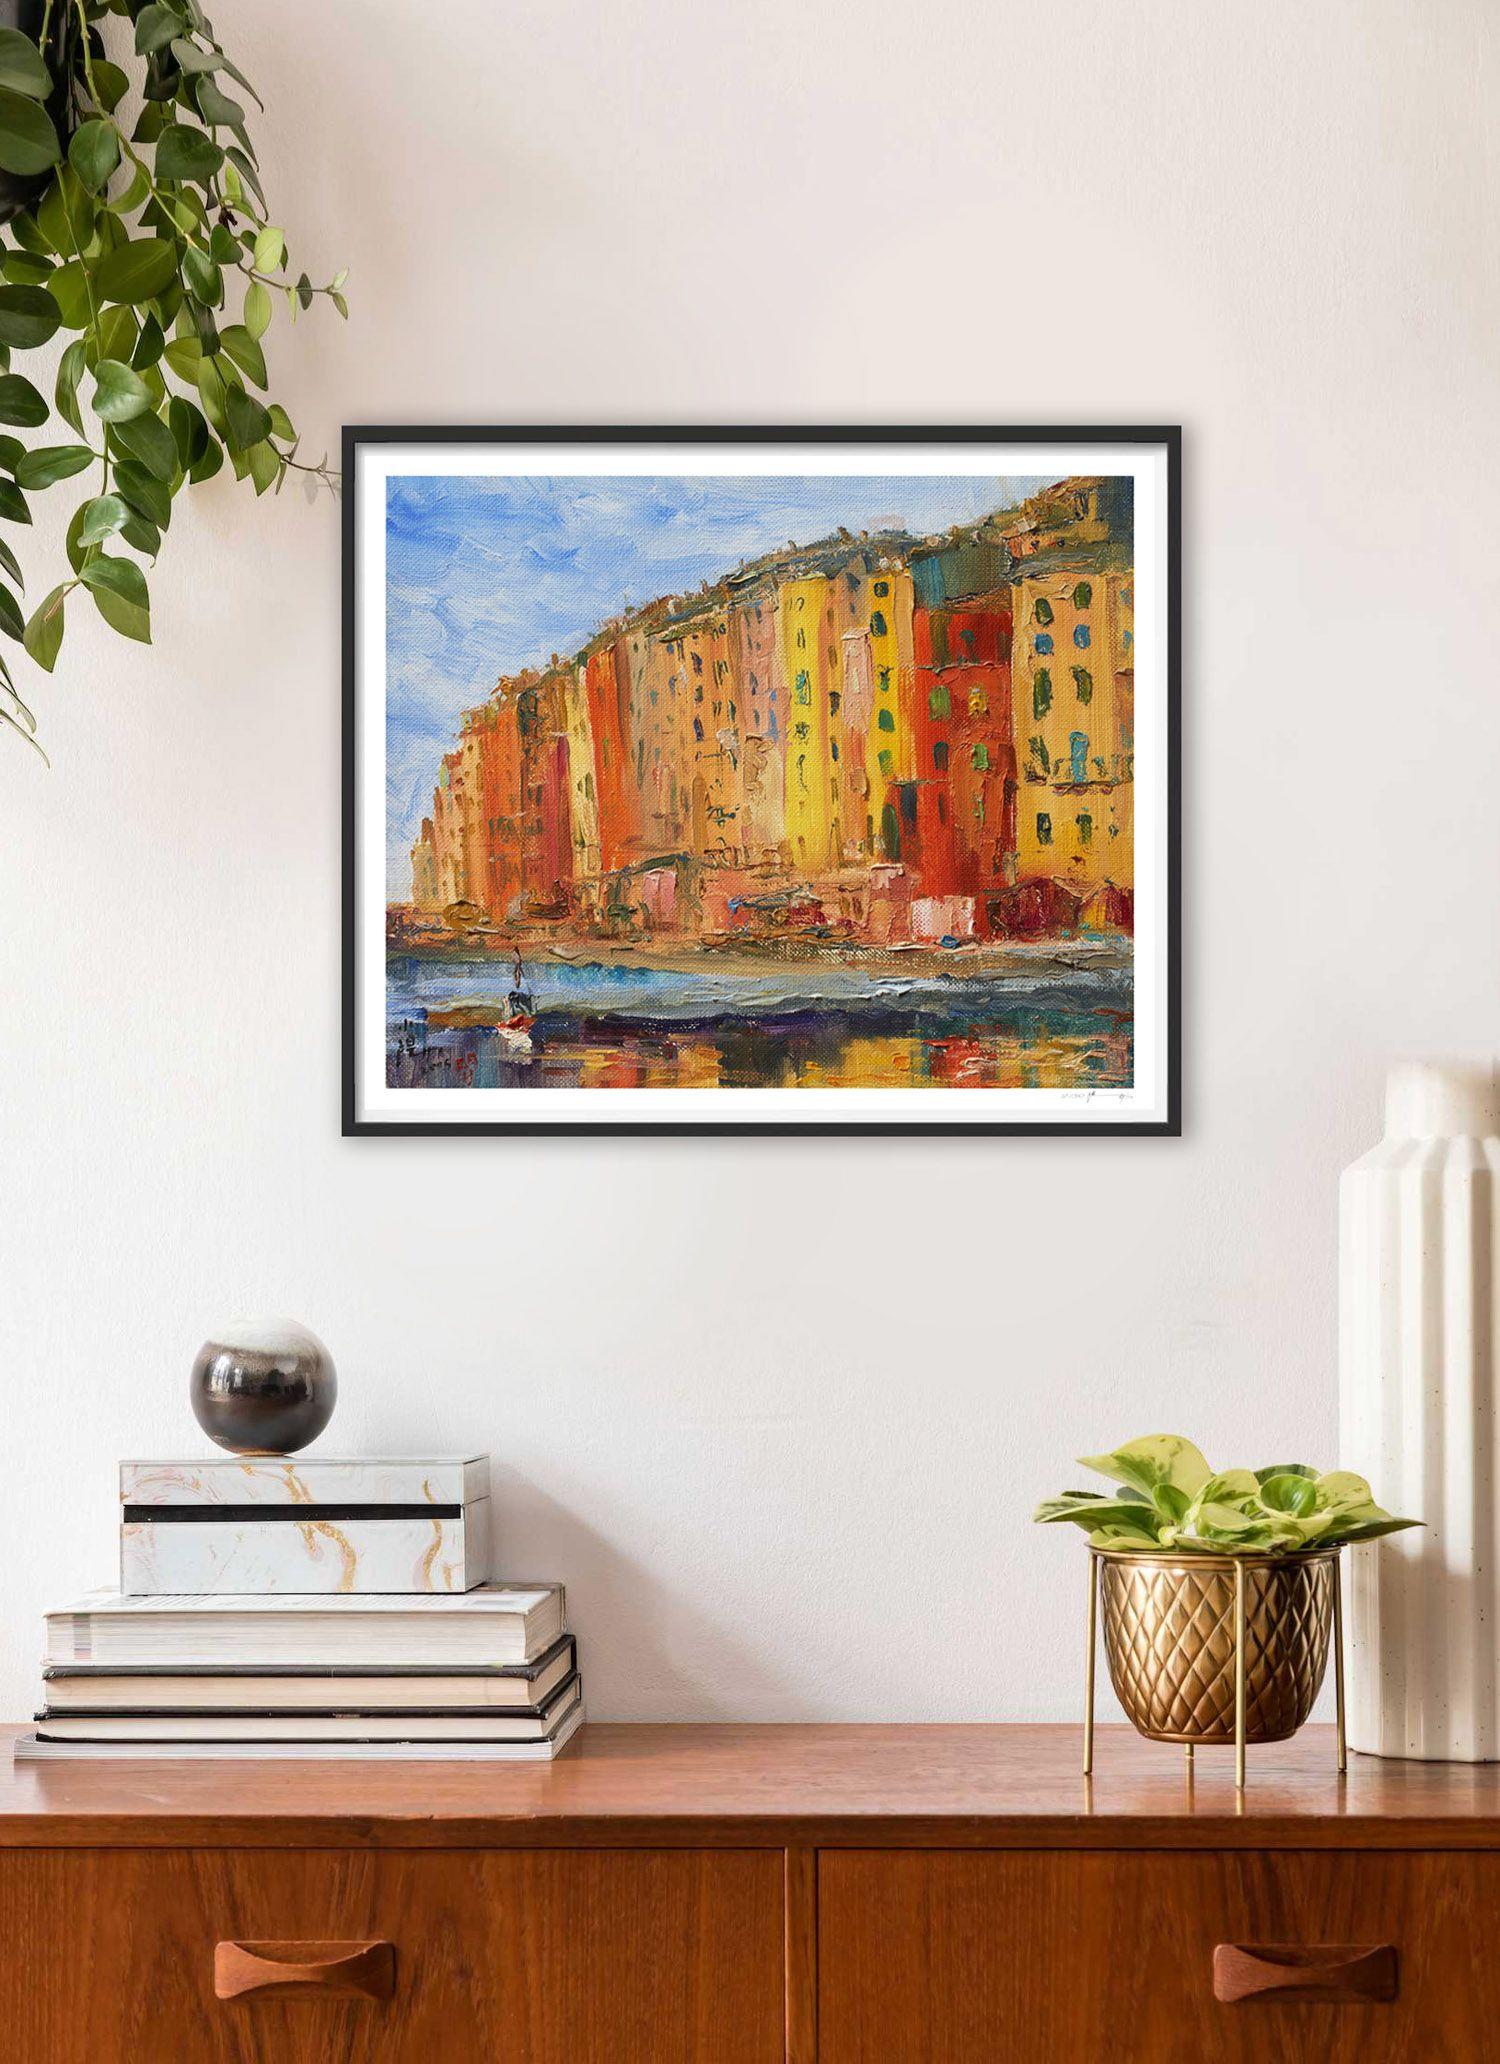 Oil painting painted in 2005, inspired by my travels to the Cinqueterre in Italy... The Italian joie de vivre is reflected in the colors of the landscape and the architecture. A small painting rich in colors and textures. Original sold, private